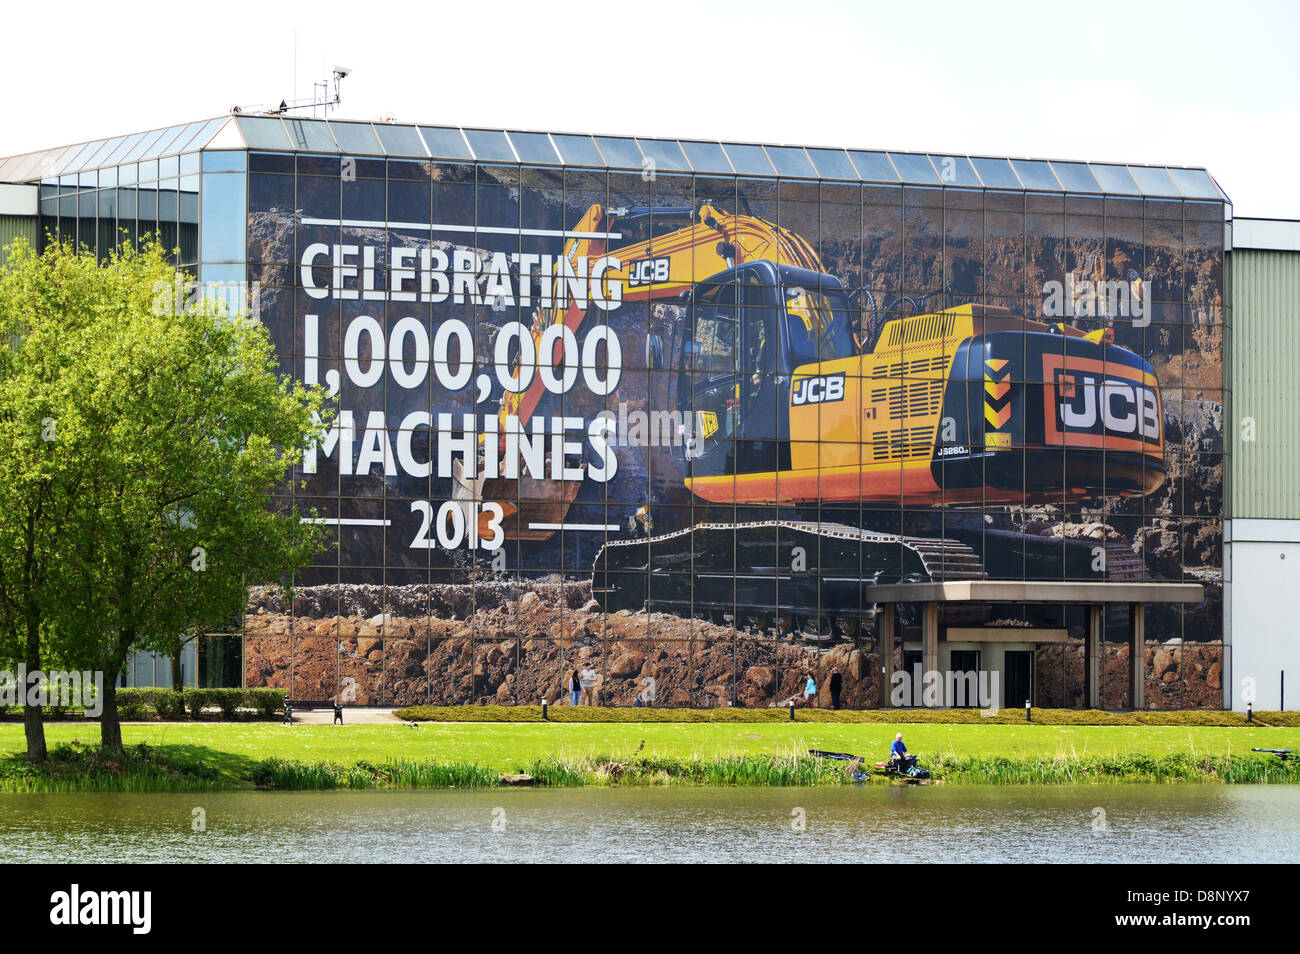 The JCB World Headquarters in Rocester Staffordshire May 2013 celebrating 1 million machines Stock Photo